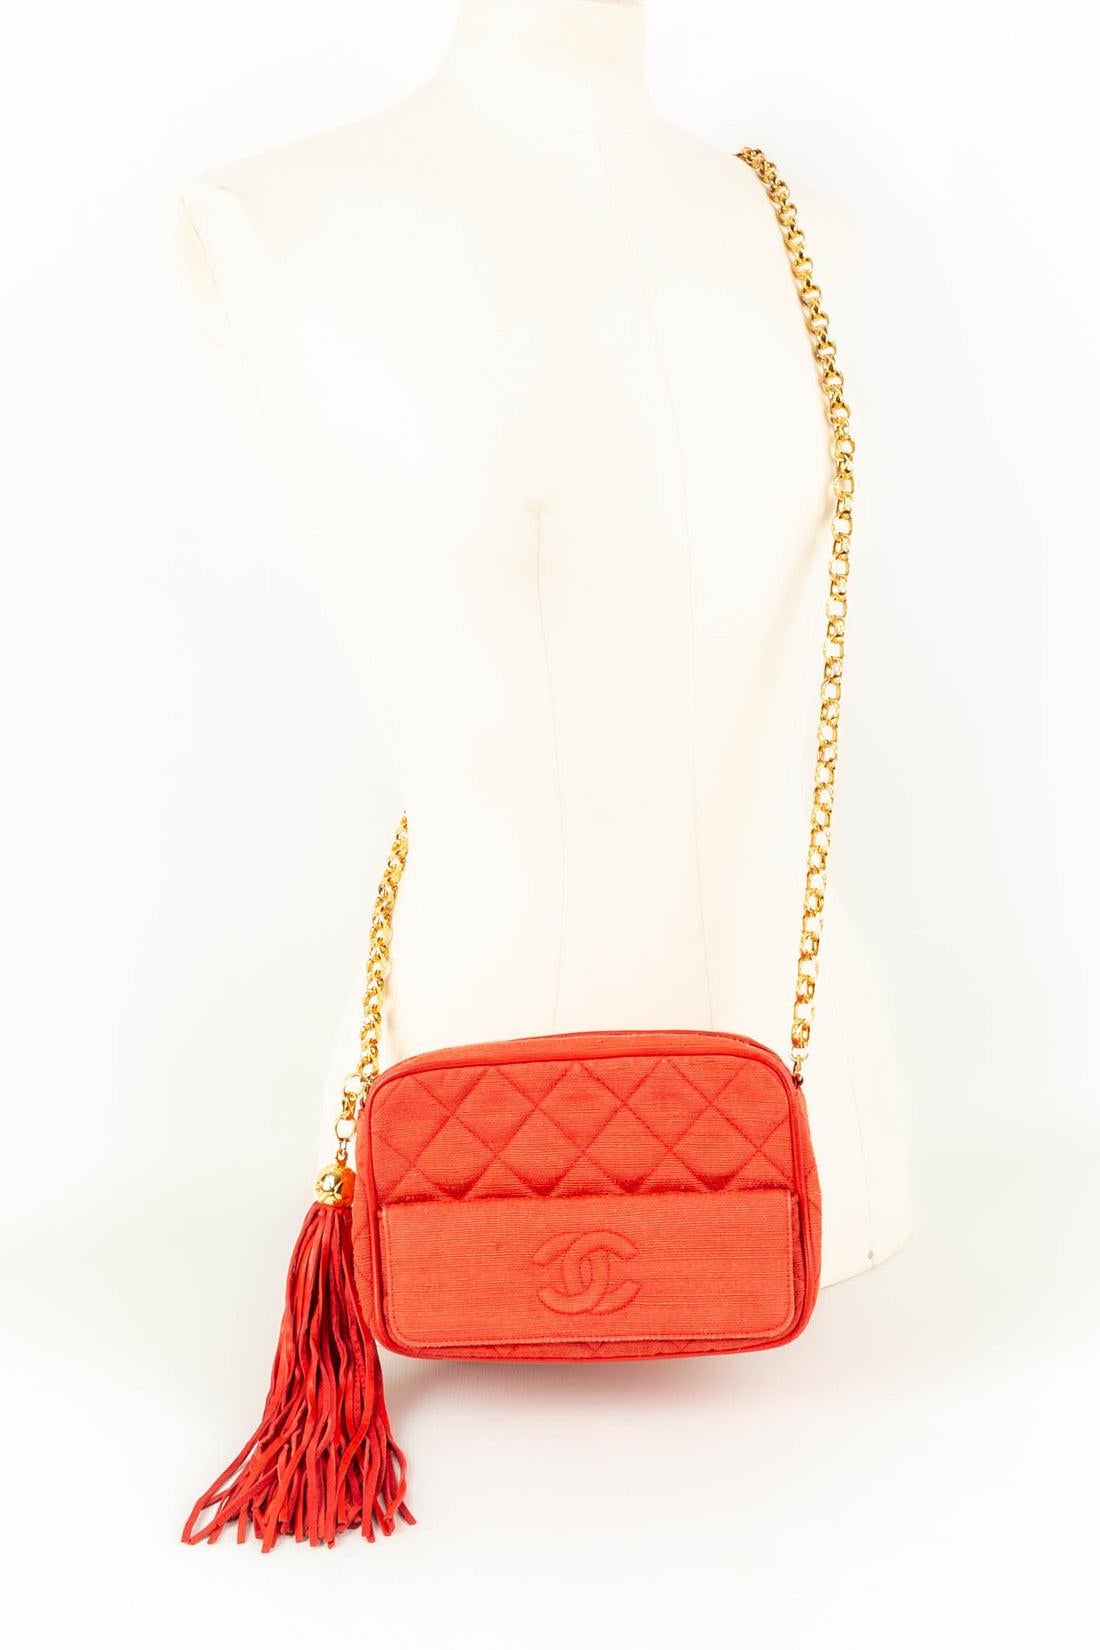 Chanel Red Quilted Cotton Bag, 1989/1991 8